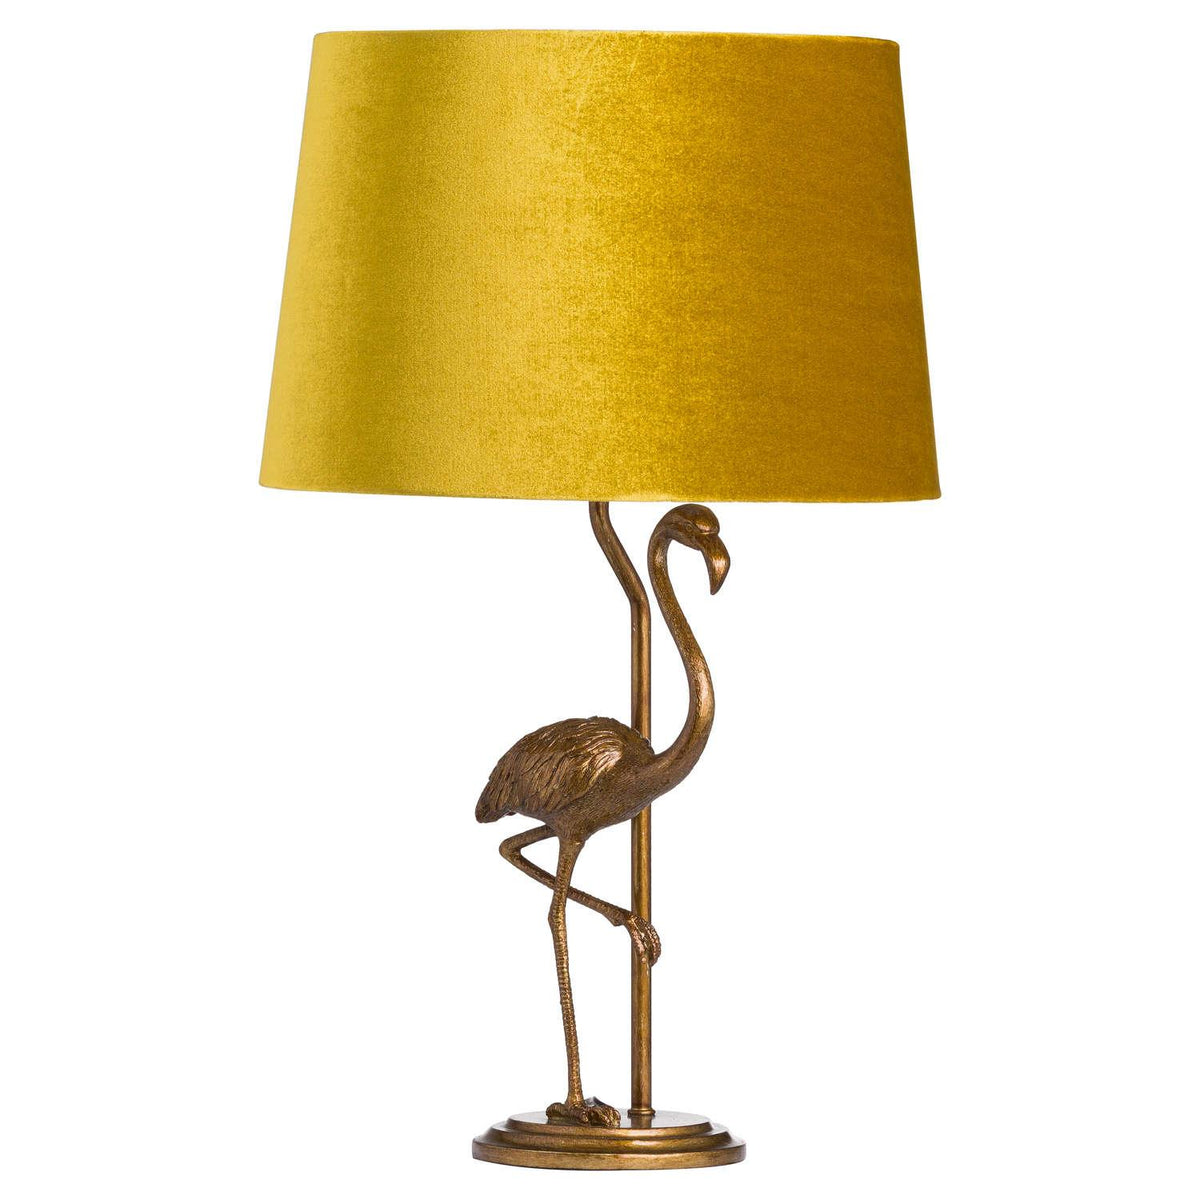 Antique Gold Flamingo Lamp With Mustard Velvet Shade - Vookoo Lifestyle